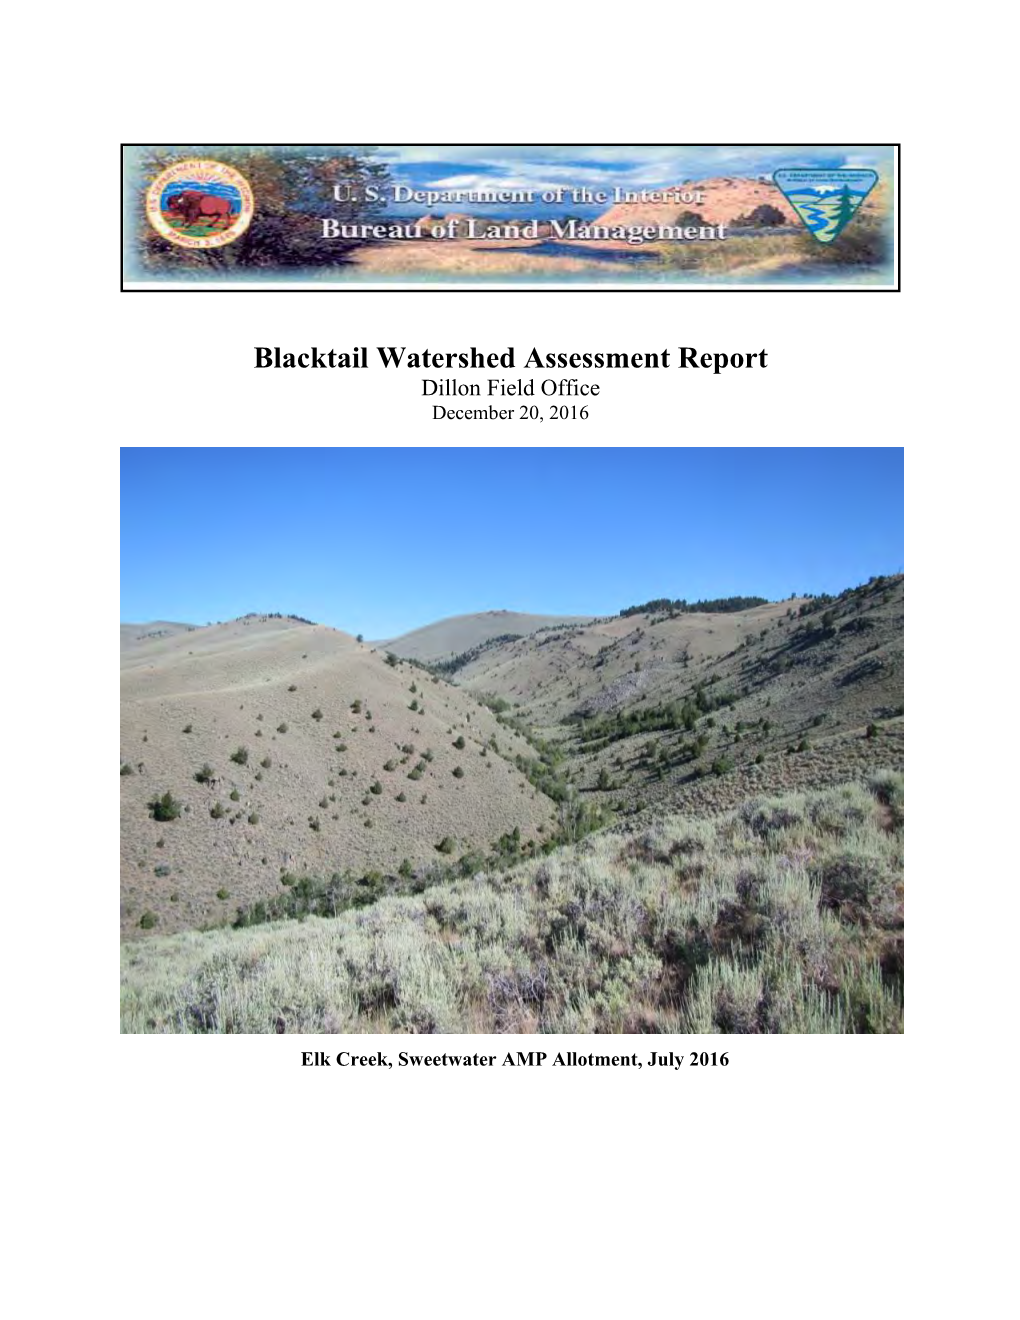 Blacktail Watershed Assessment Report Dillon Field Office December 20, 2016